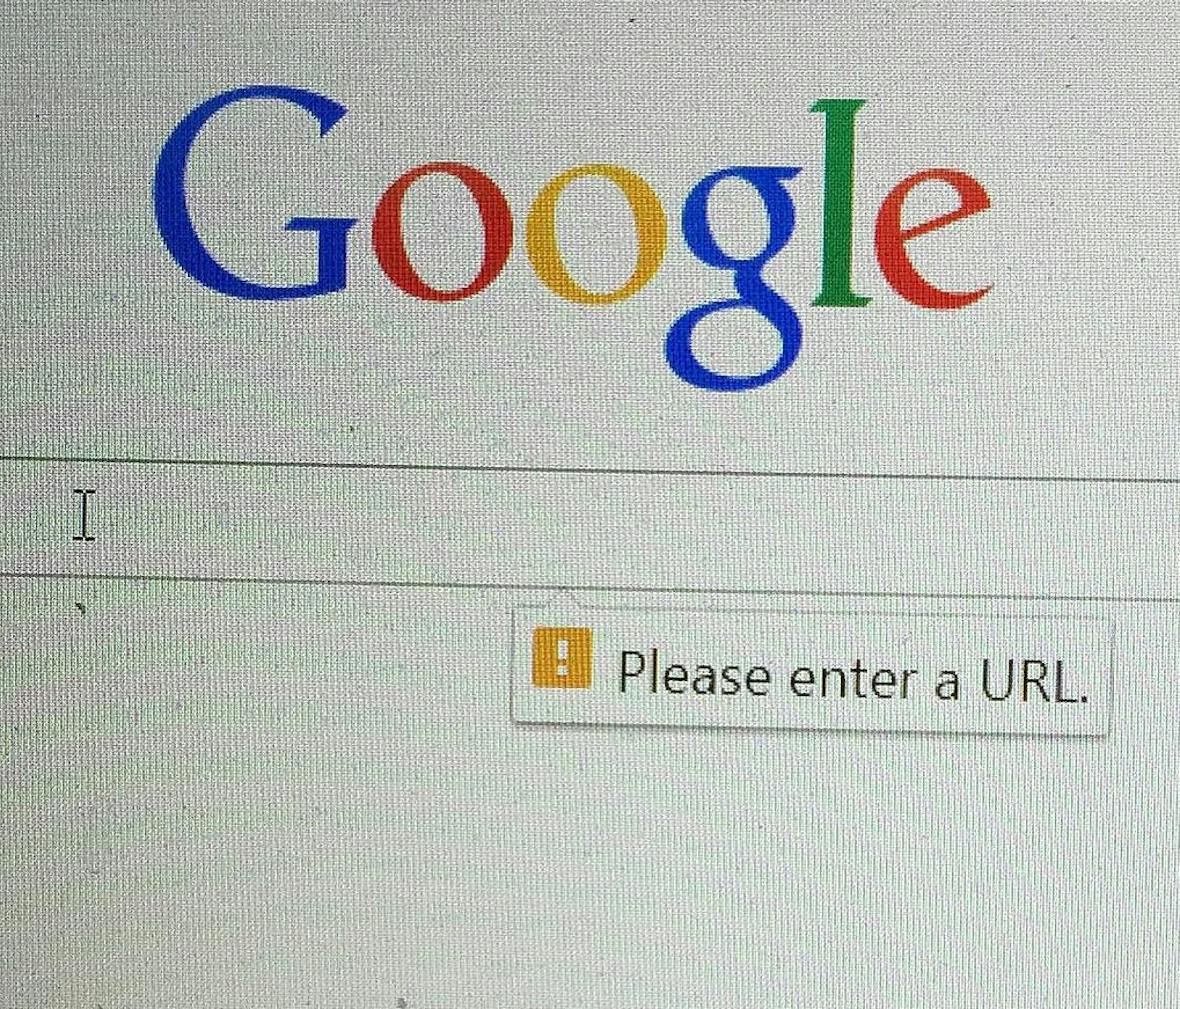 Google is looking for a URL alternative